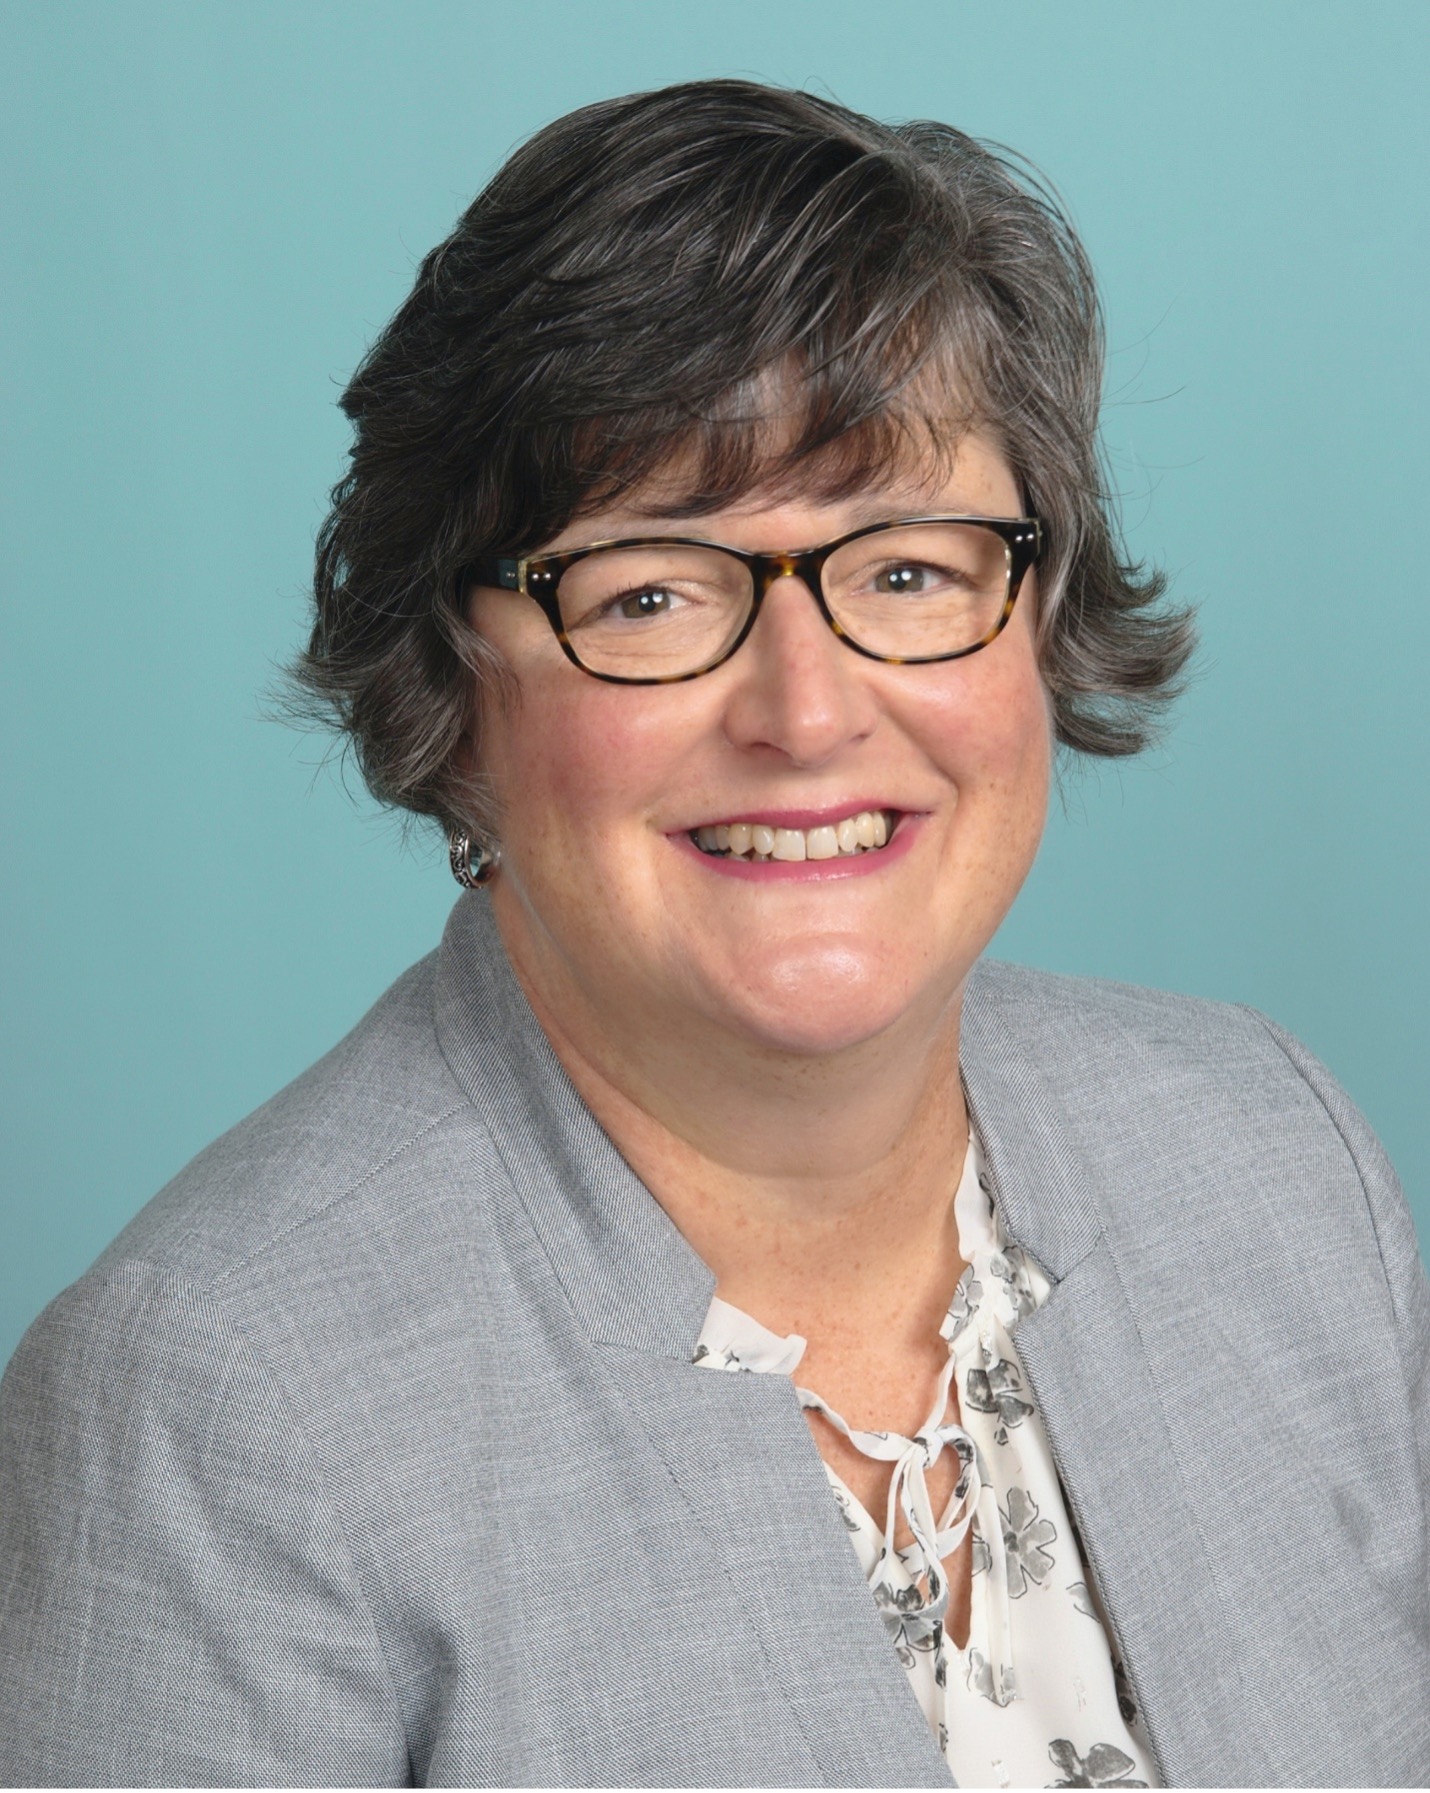 ONS member Lynne Brophy, MSN, PMGT-BC, APRN-CNS, AOCN®, oncology clinical nurse specialist at the Stefanie Spielman Comprehensive Breast Center, which is a part of the Ohio State University Comprehensive Cancer Center in Columbus, OH